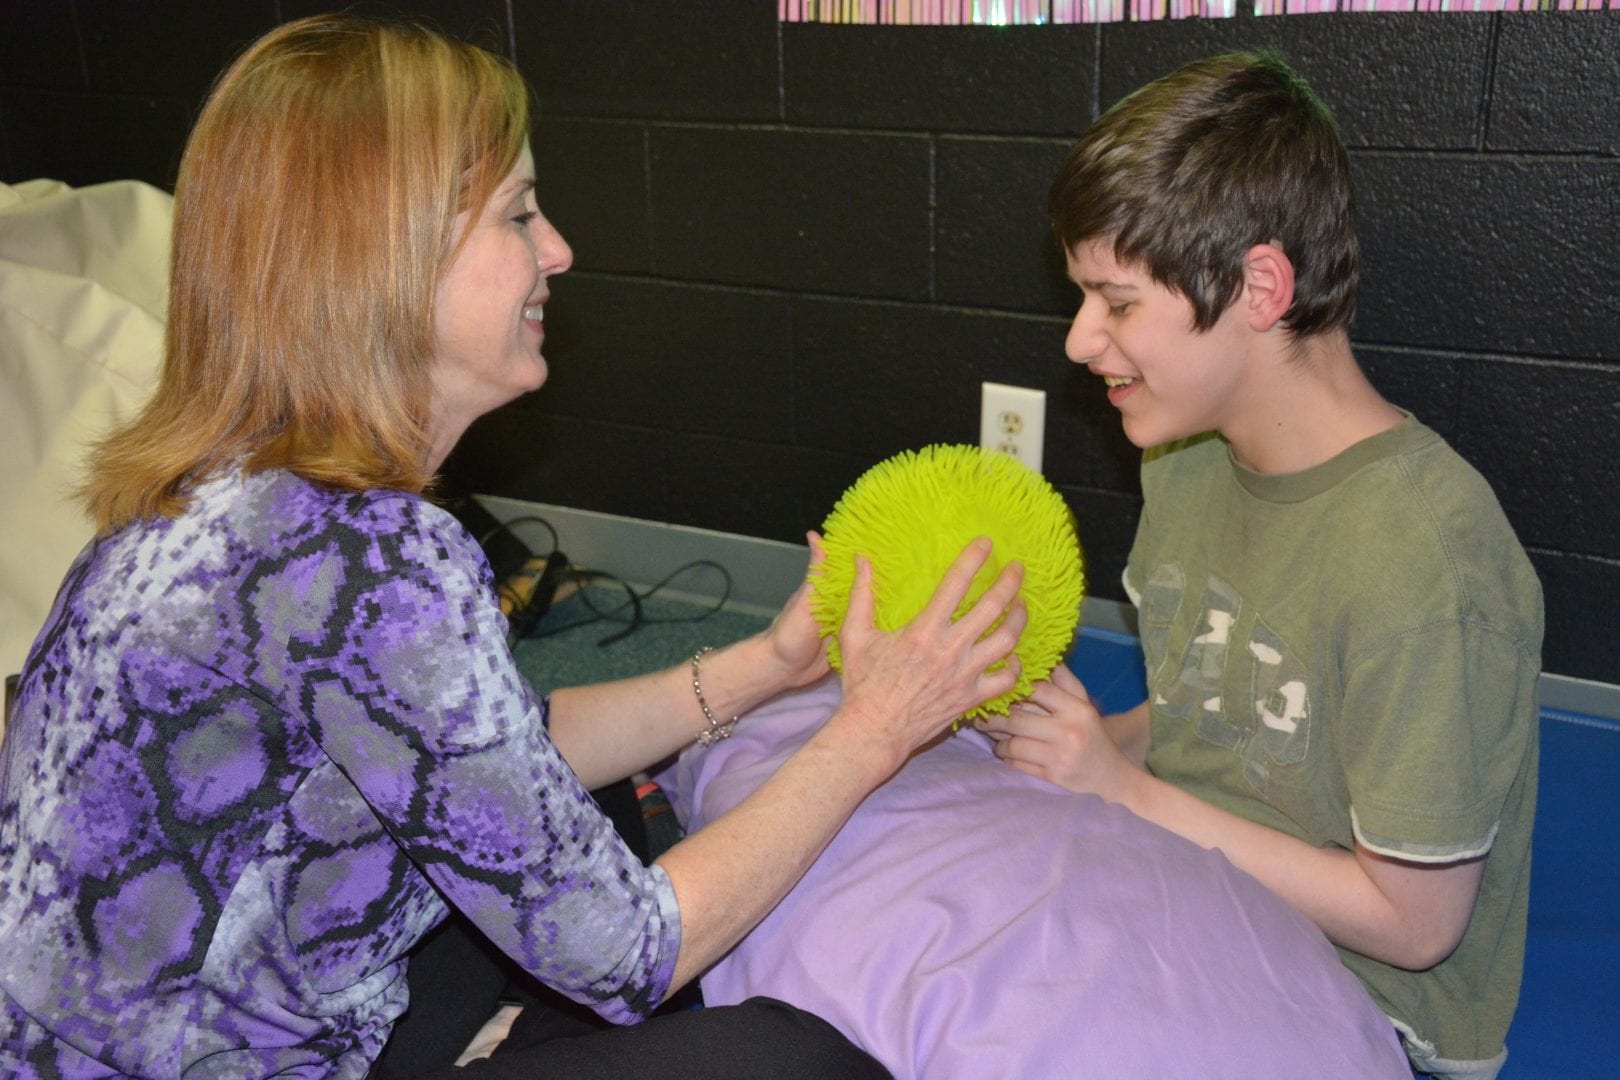 A learner begins to imitate his teacher during a Sensory Learning Kit play routine.